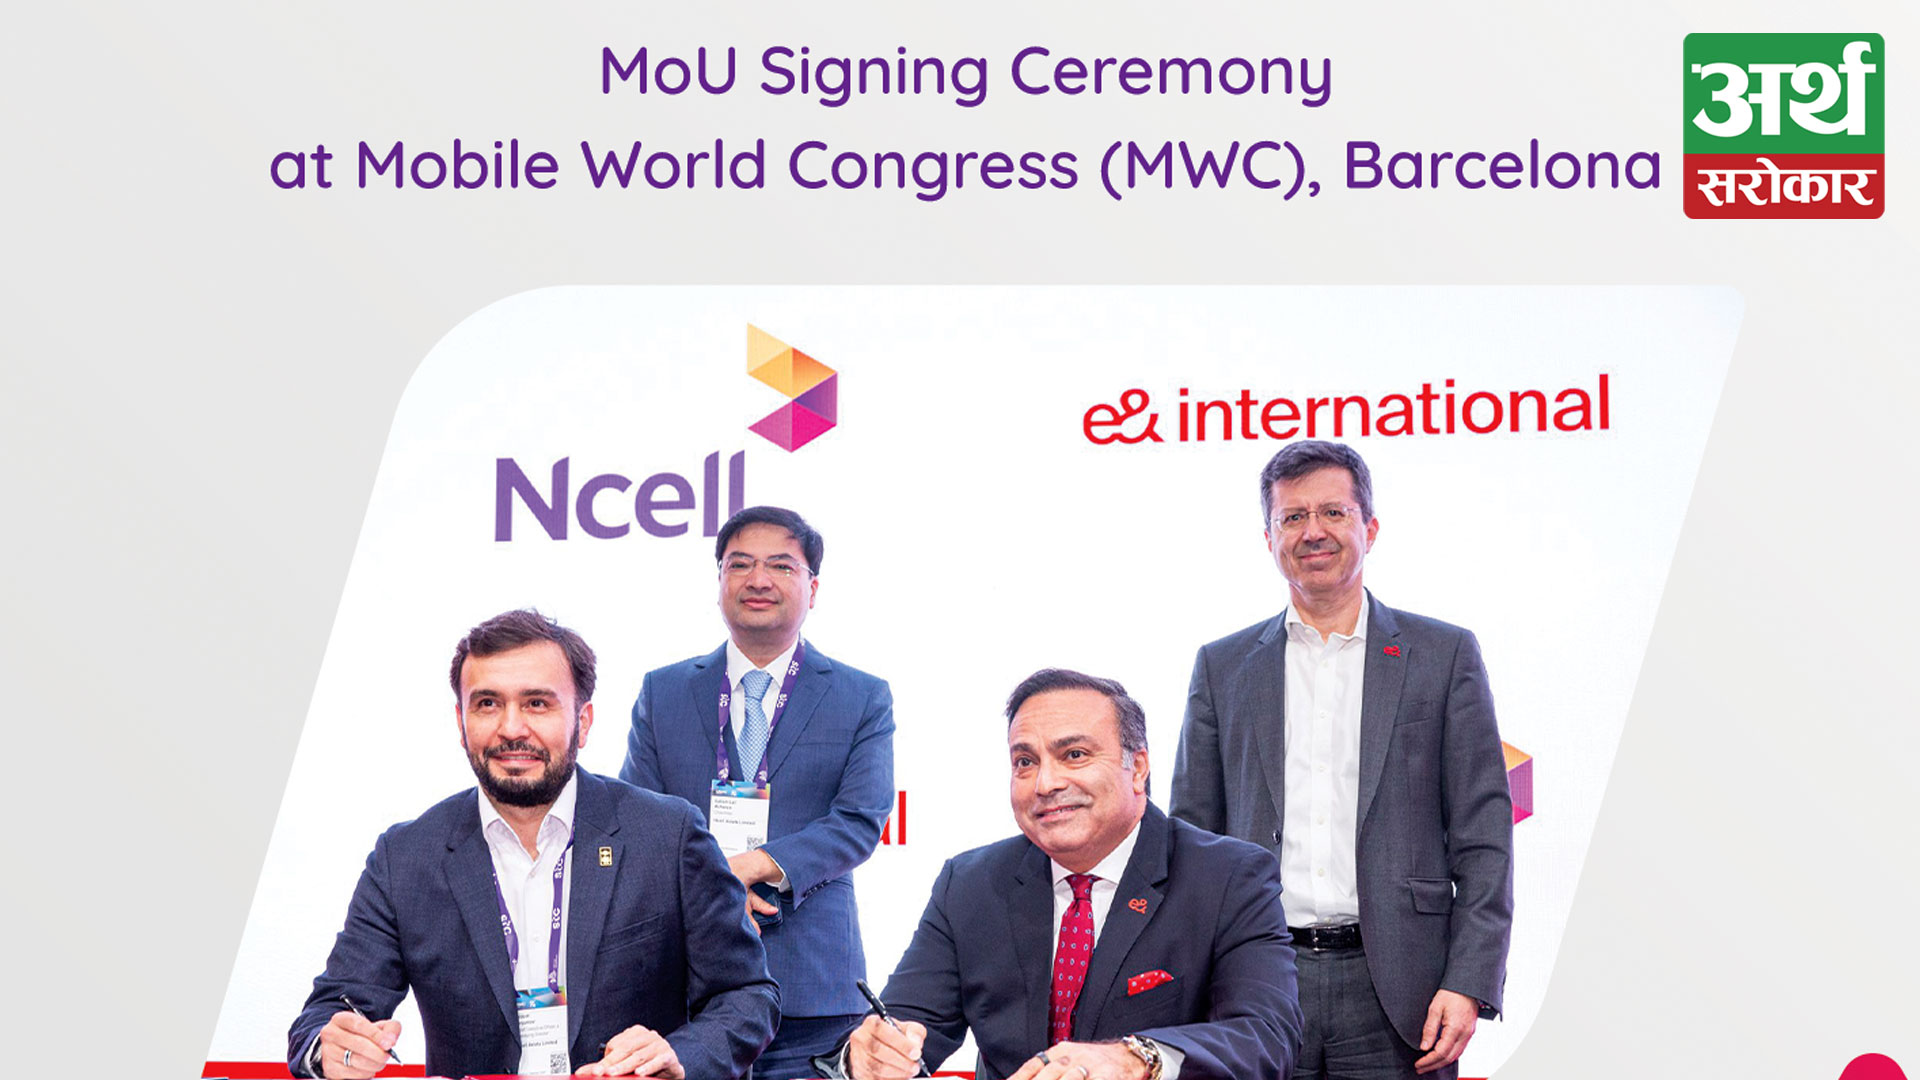 Ncell and e& International sign a MoU to deliver superior digital services and customer experiences